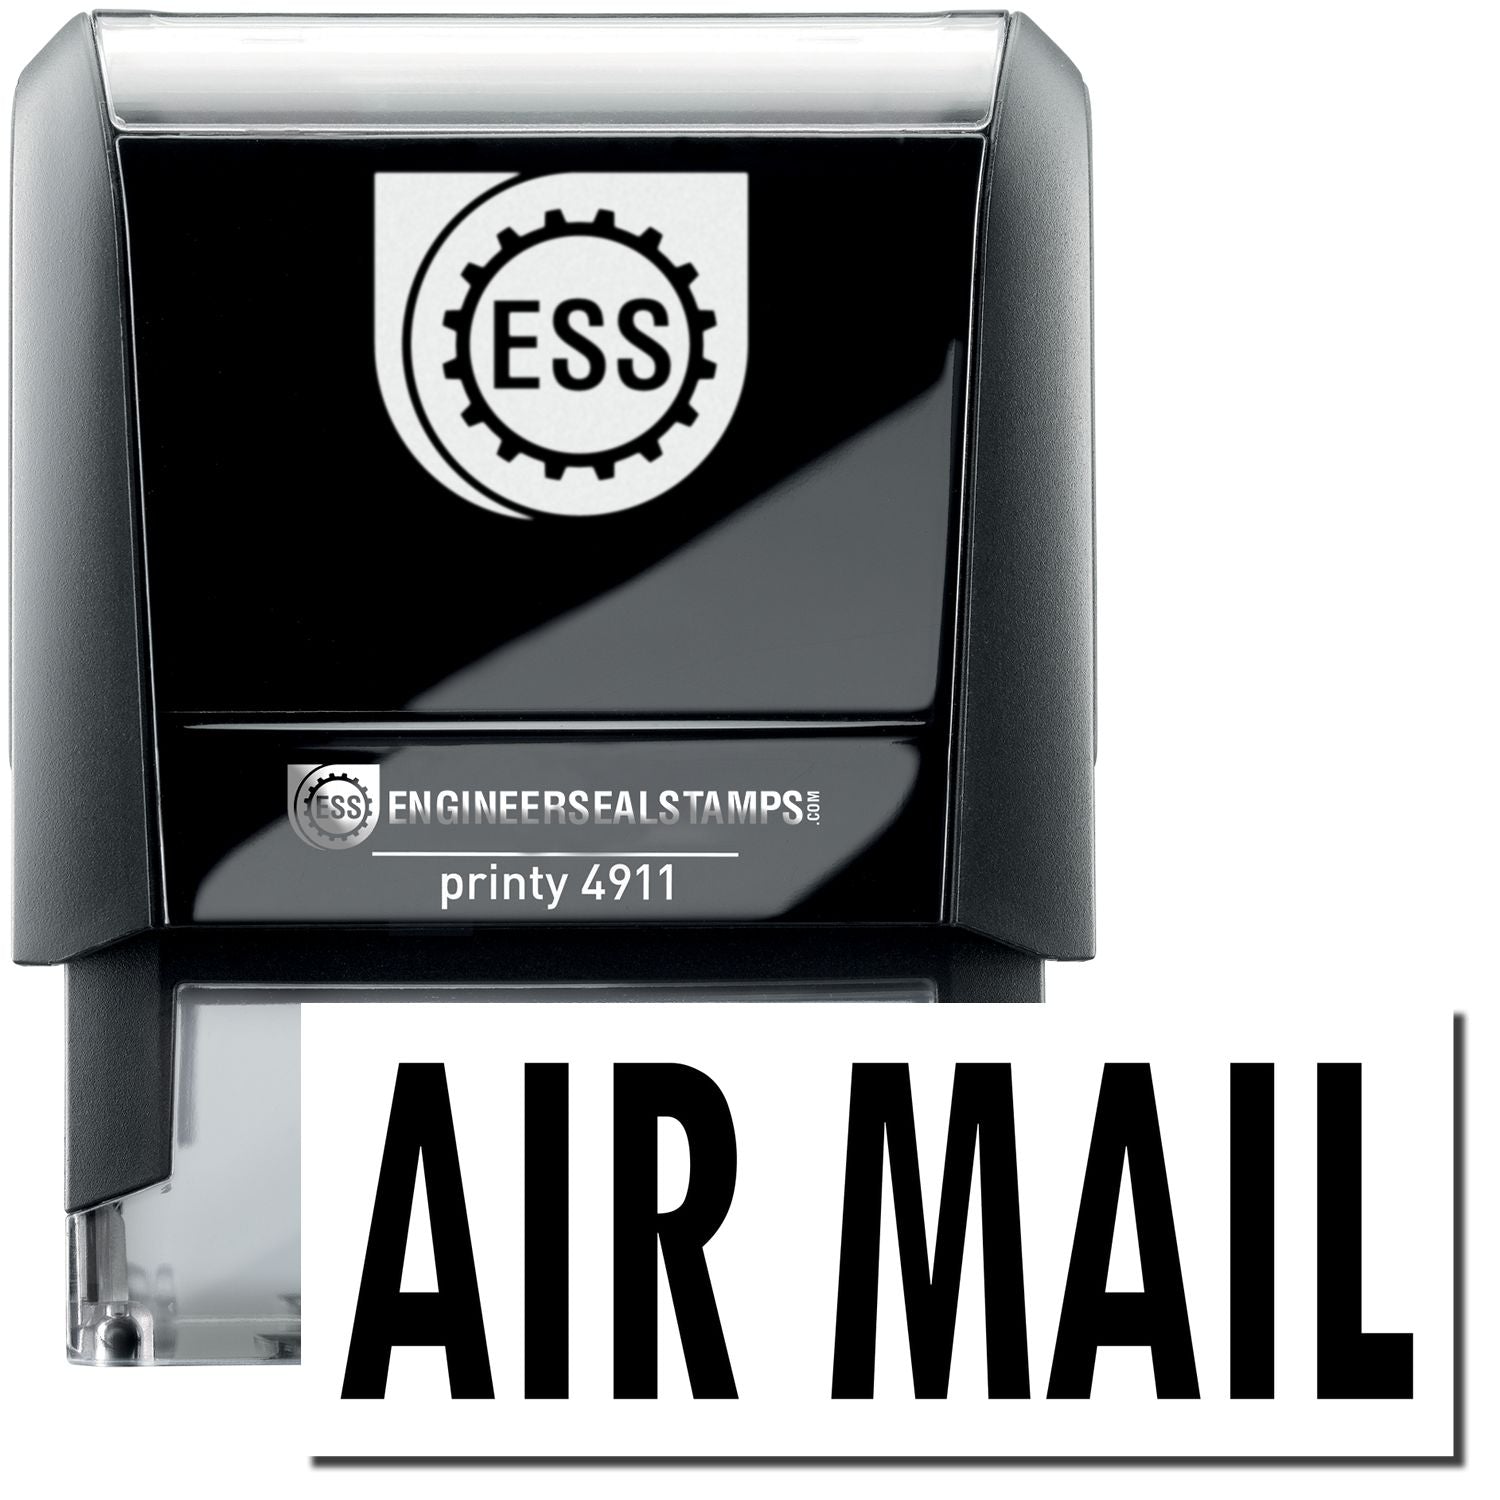 A self-inking stamp with a stamped image showing how the text "AIR MAIL" is displayed after stamping.